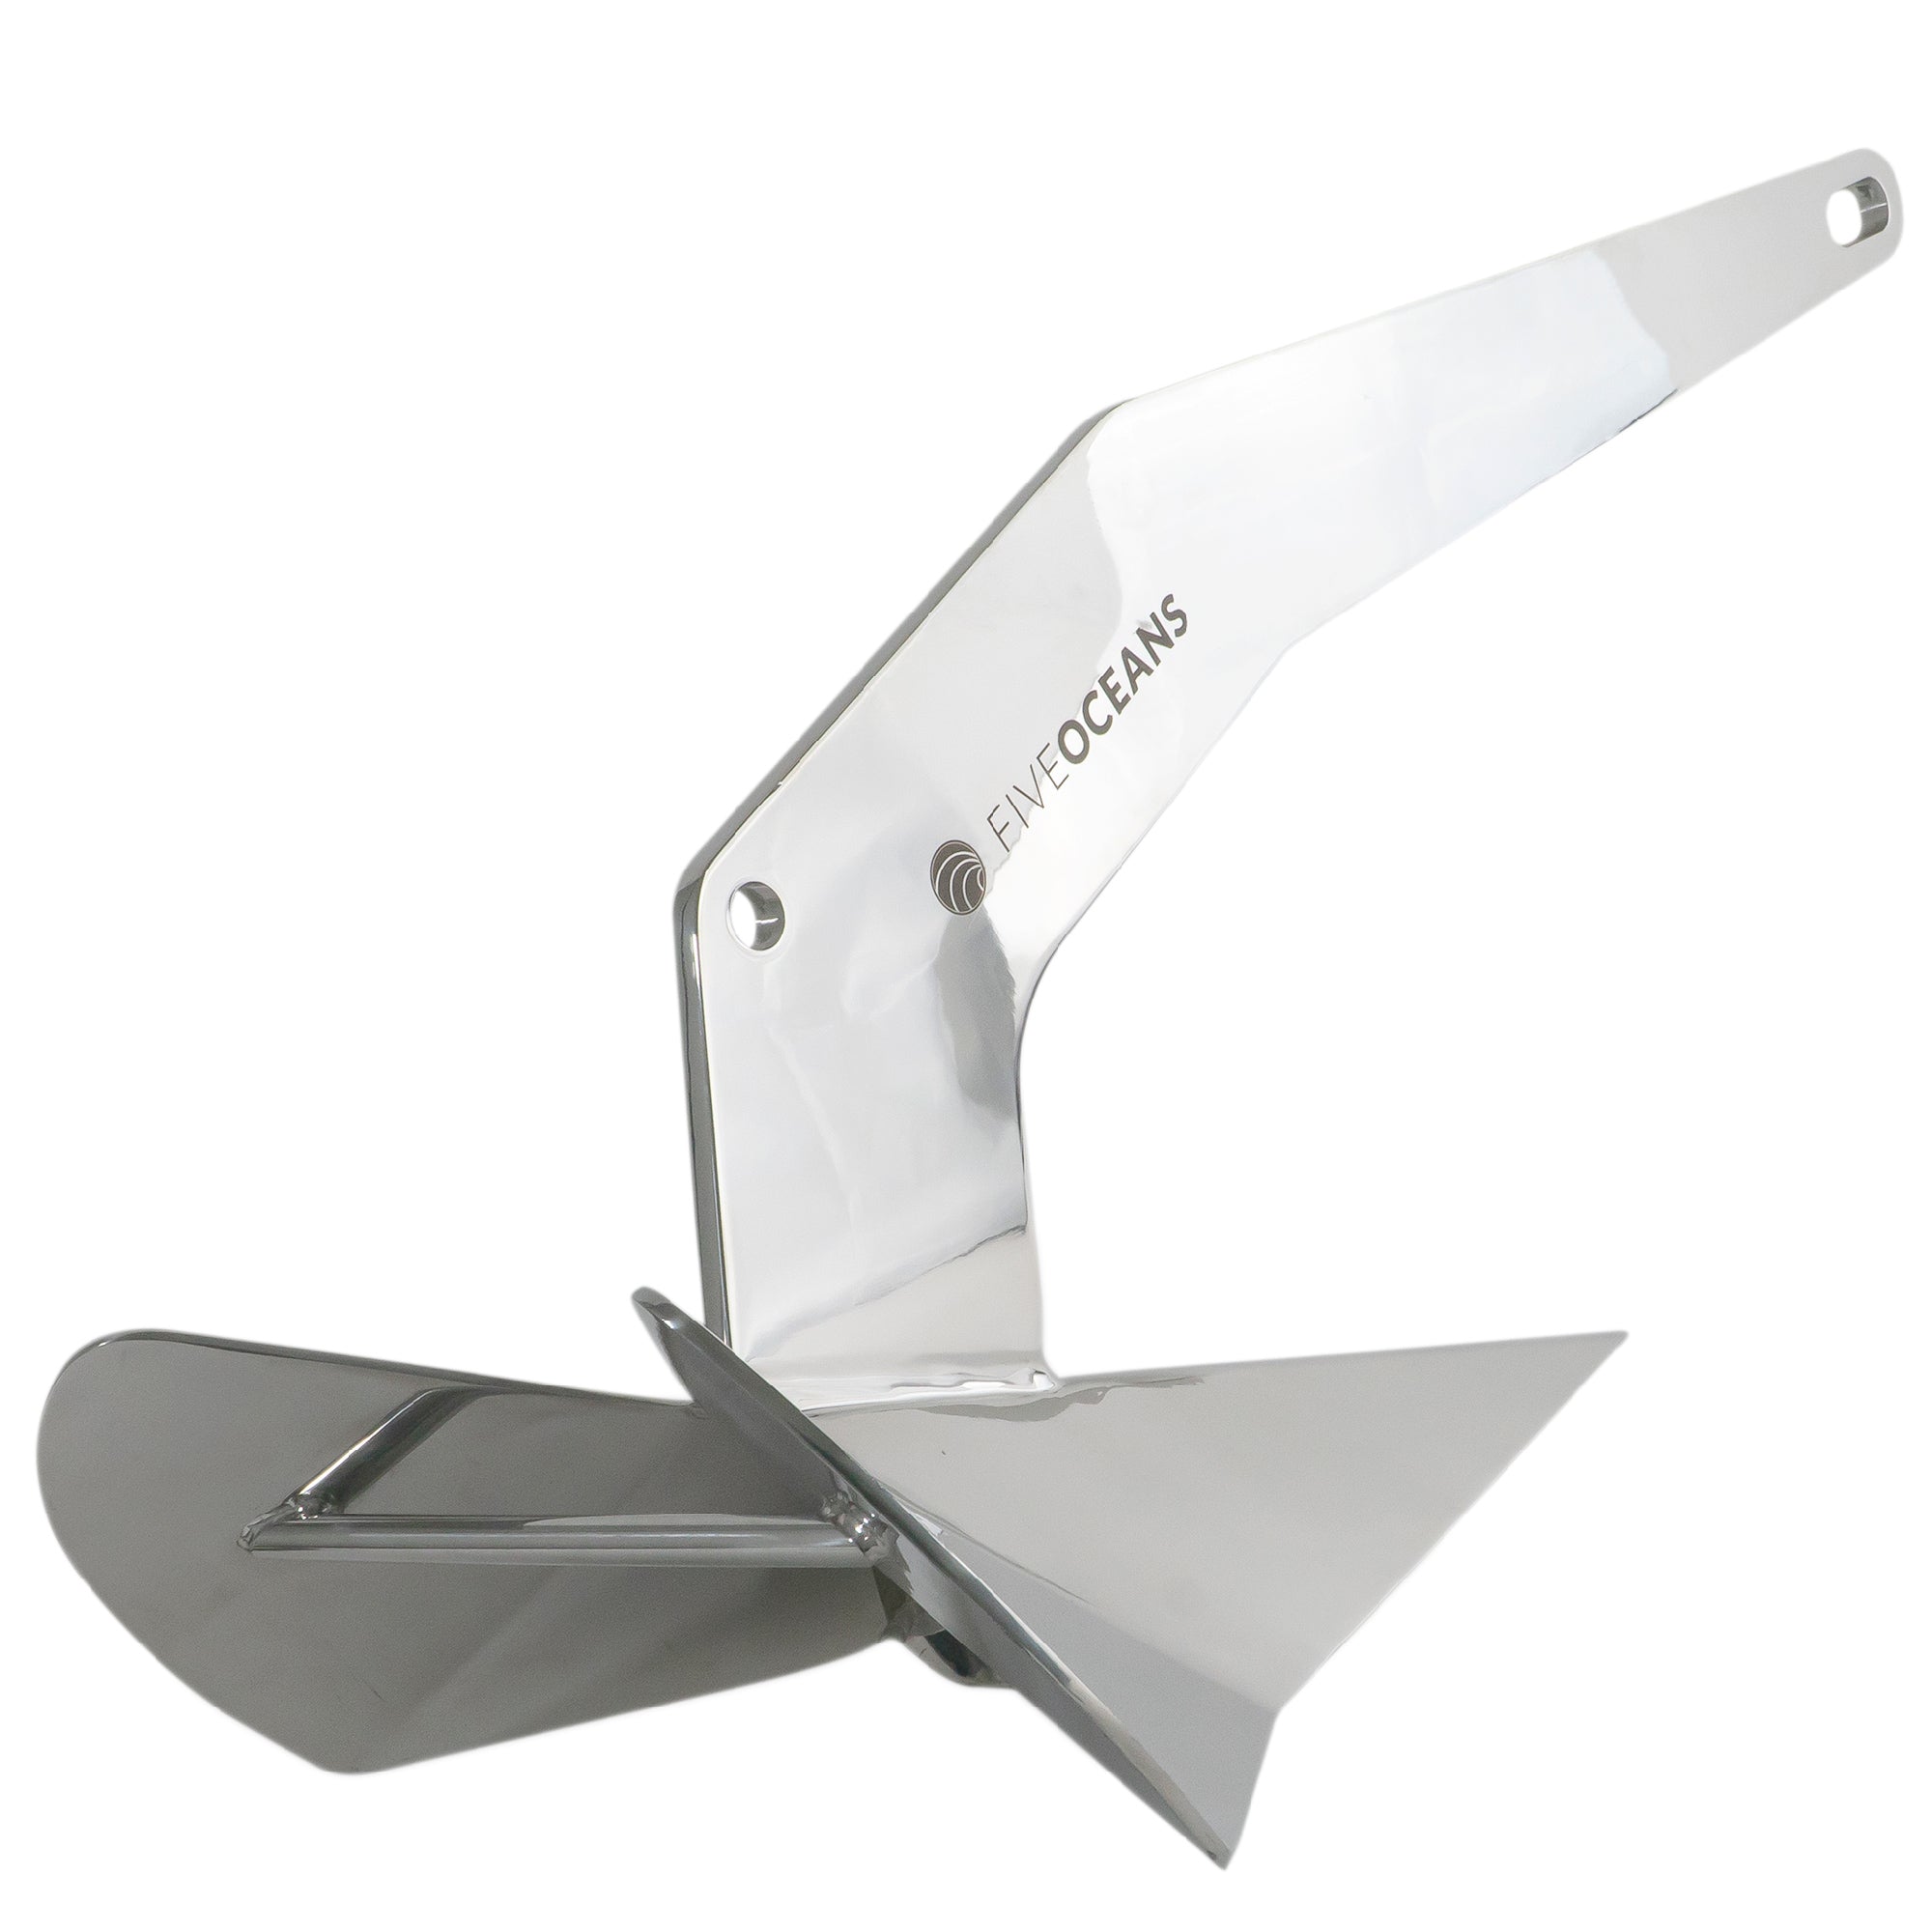 Delta Style Wing Anchor, 22 Lb Stainless Steel - FO3689